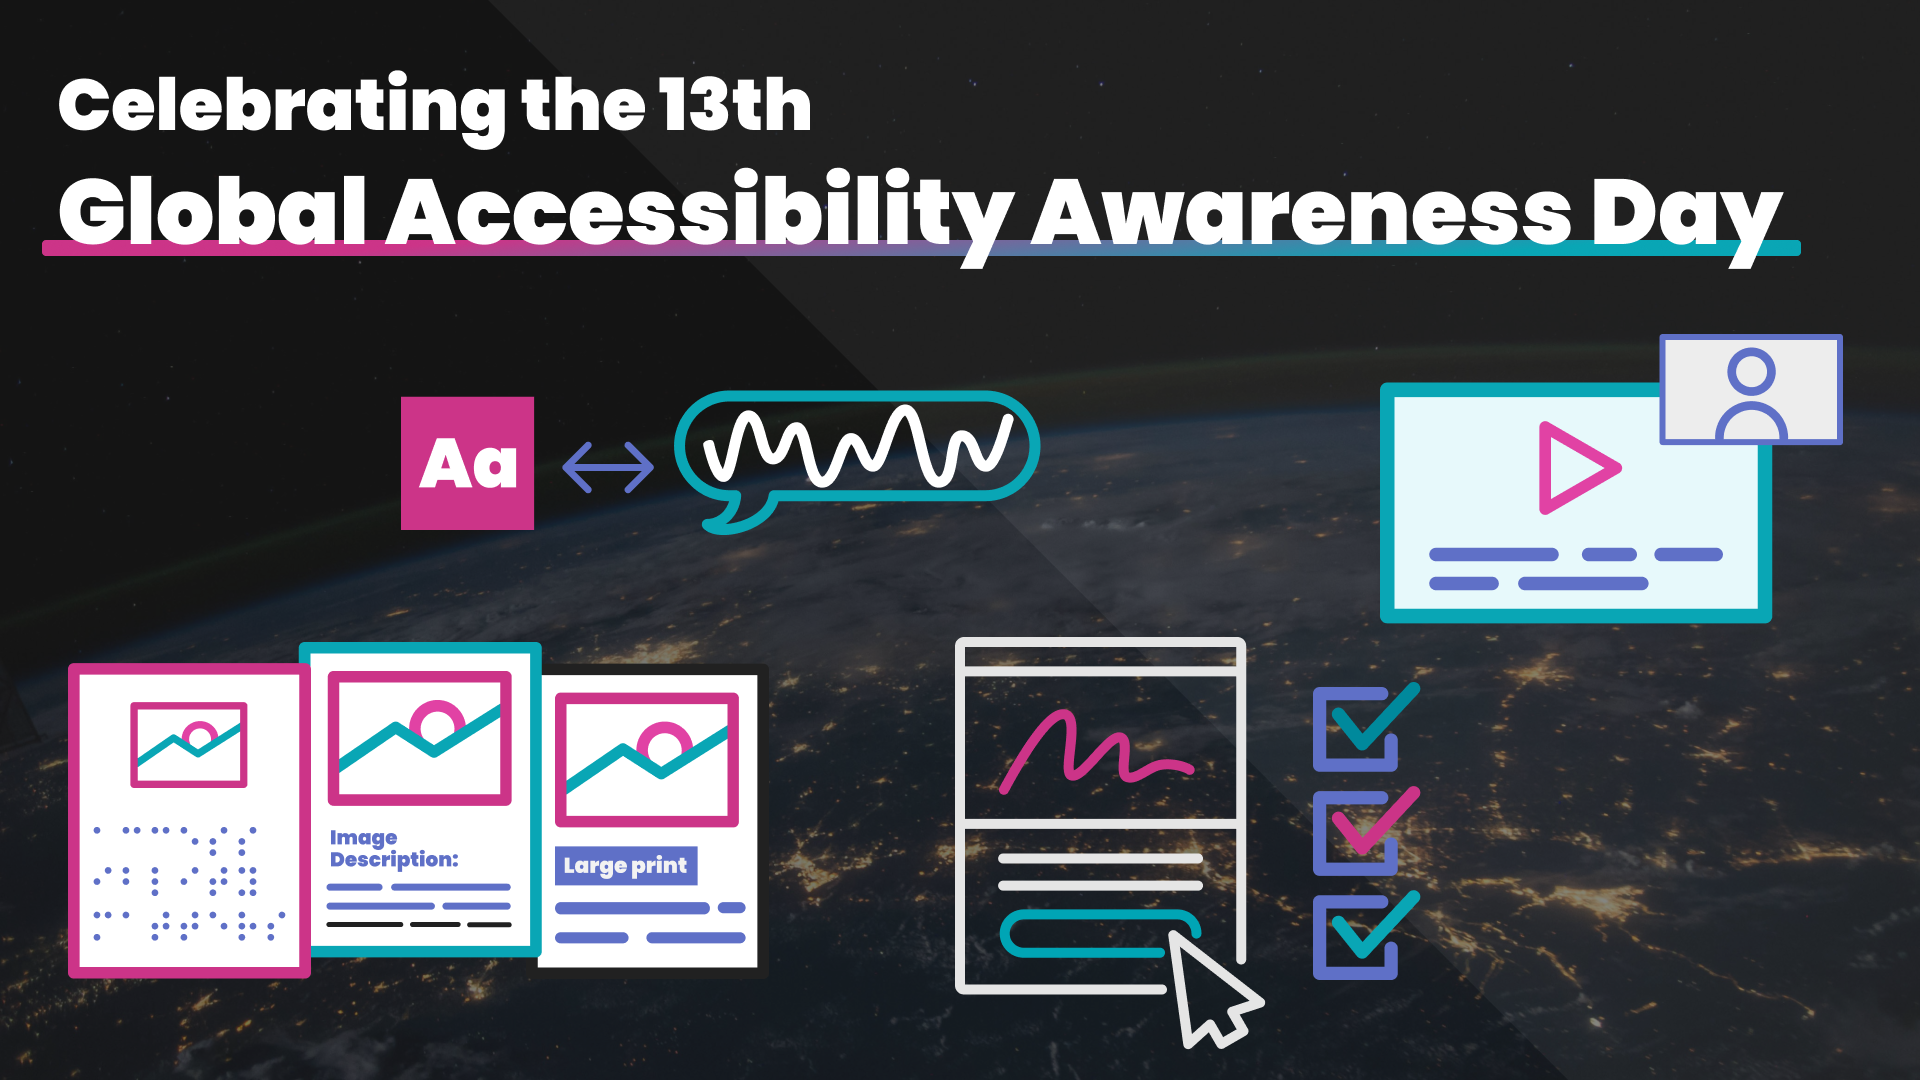 ID: A soft overlay of a globe from space with dimmed lights, the title 'Celebrating the 13th Global Accessibility Awareness Day,' and various icons representing accessible marketing.